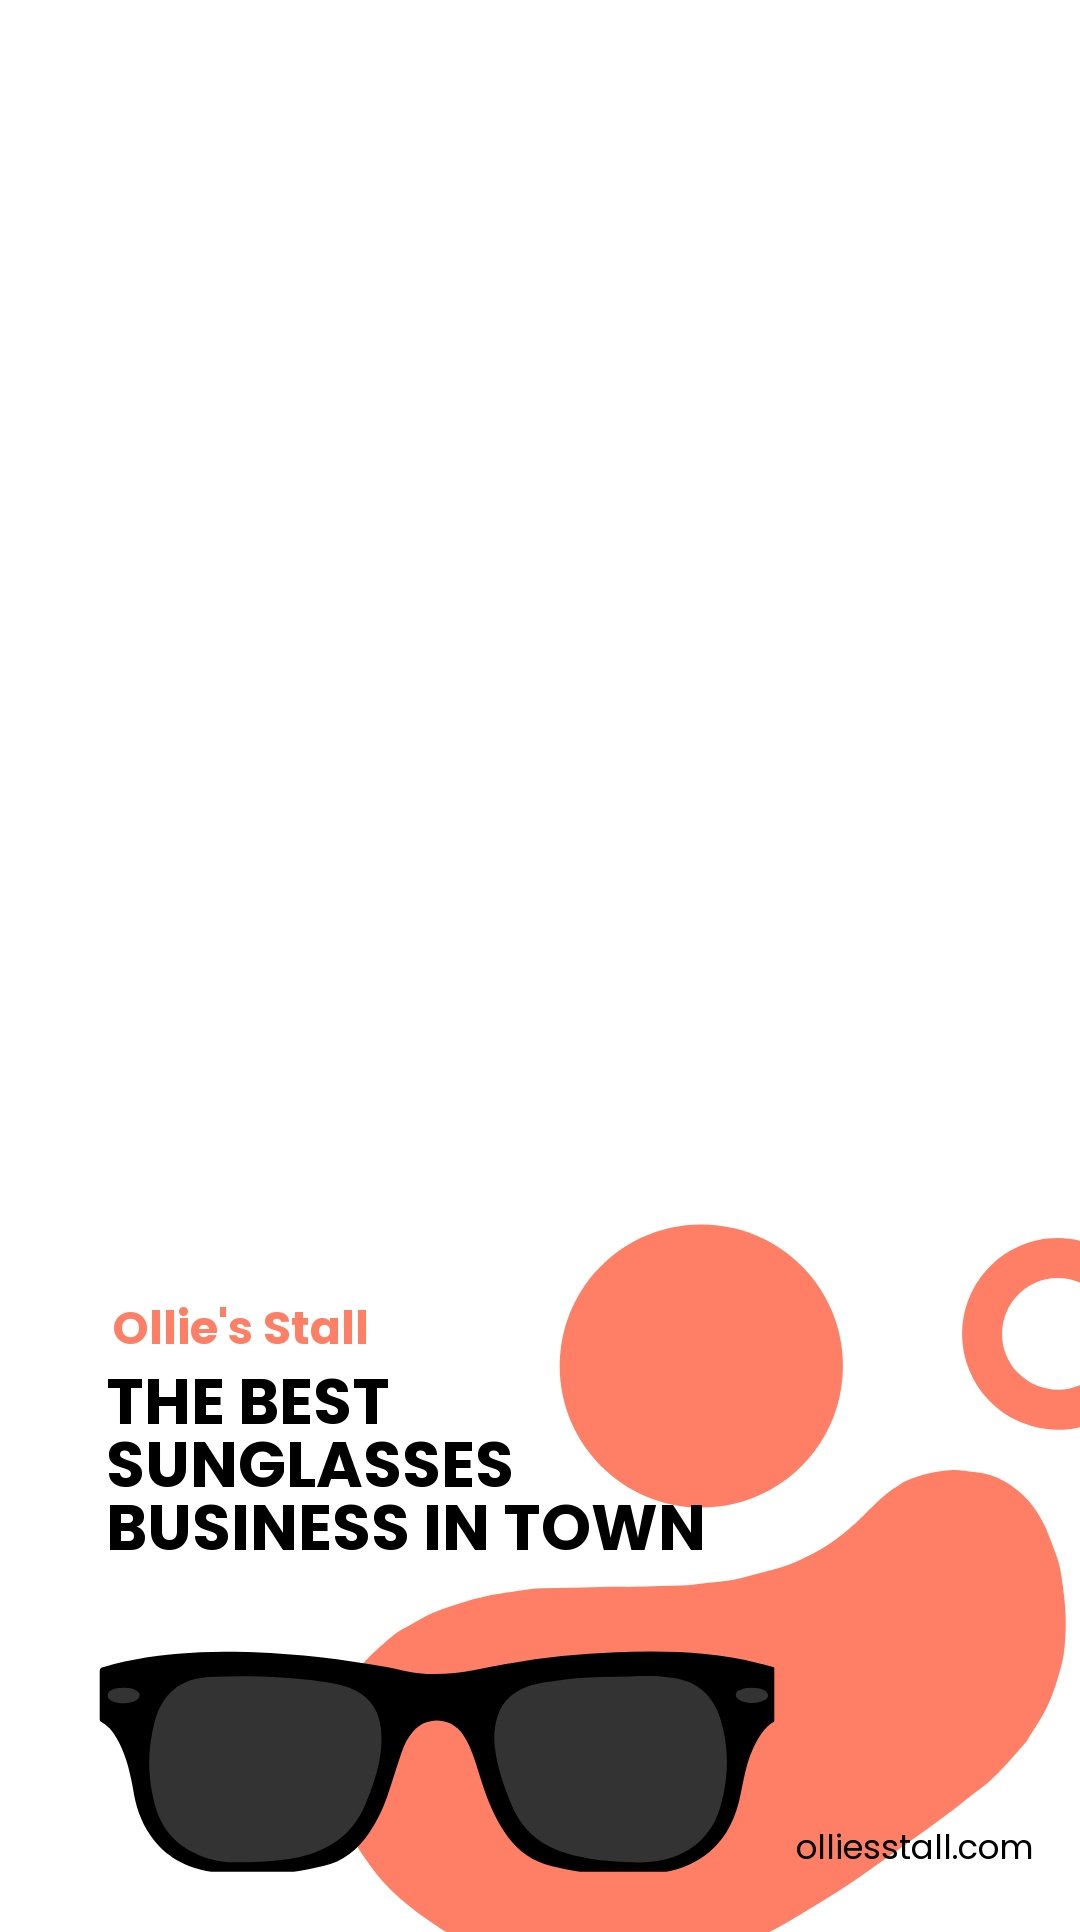 Free In-store Small Business Snapchat Geofilter Template